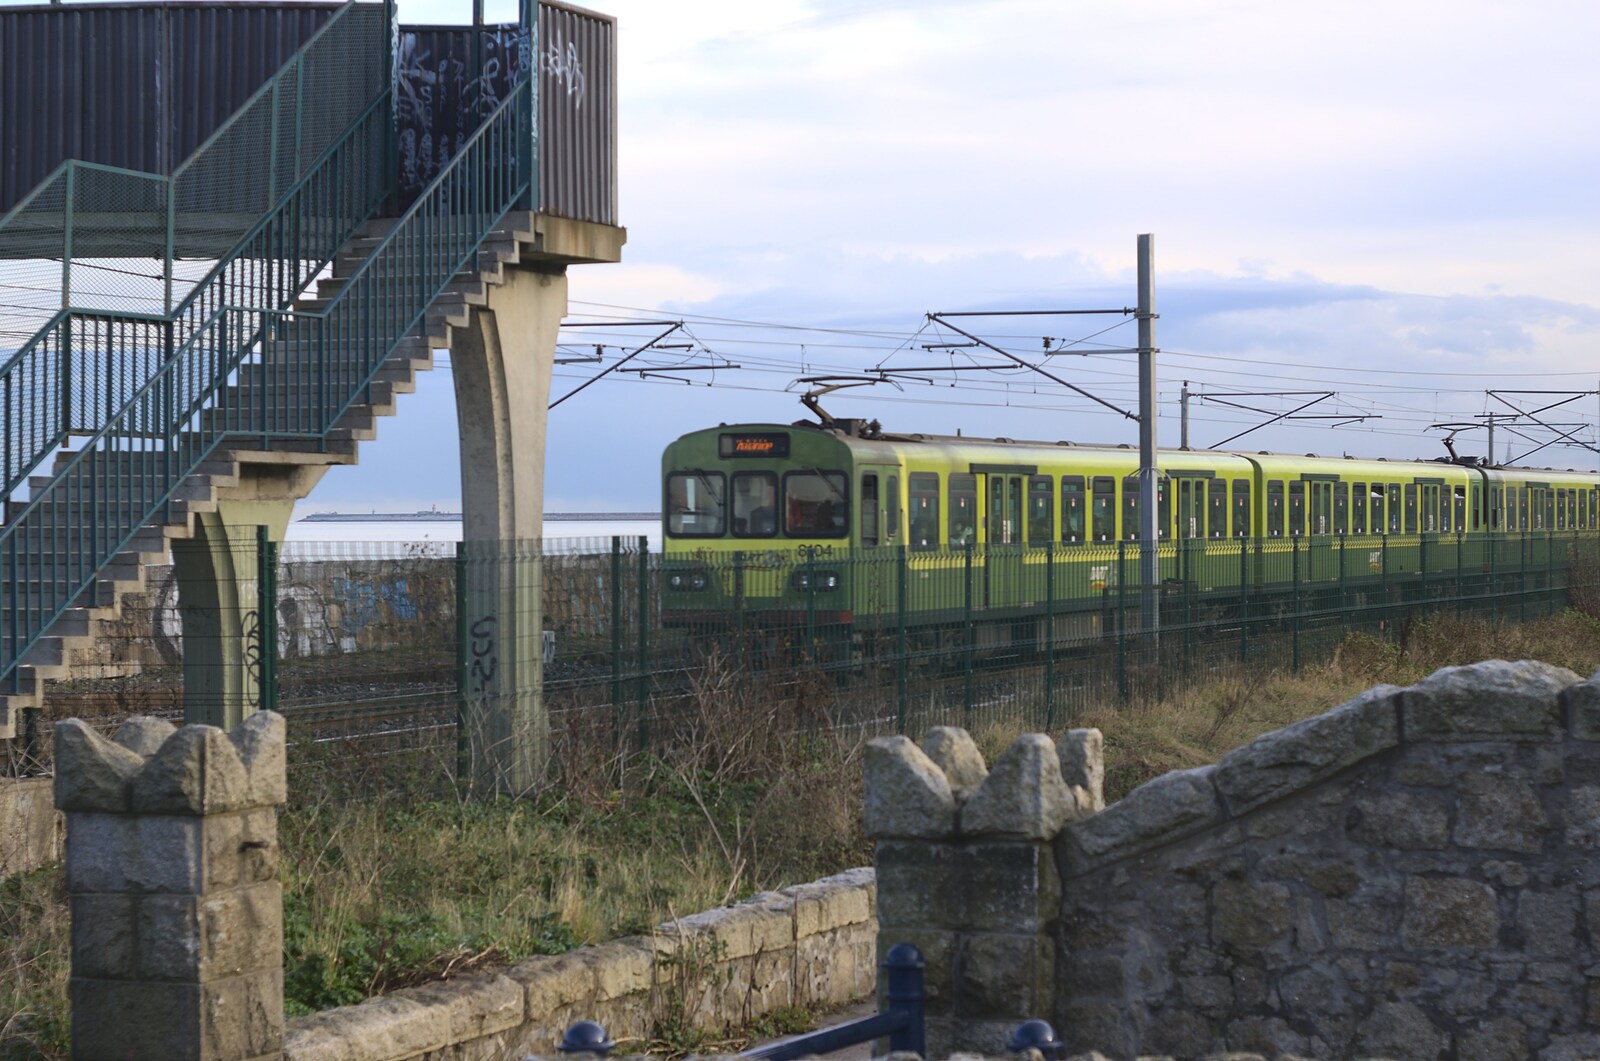 A DART train rumbles past from Christmas at Number 19, Blackrock, County Dublin, Ireland - 25th December 2009